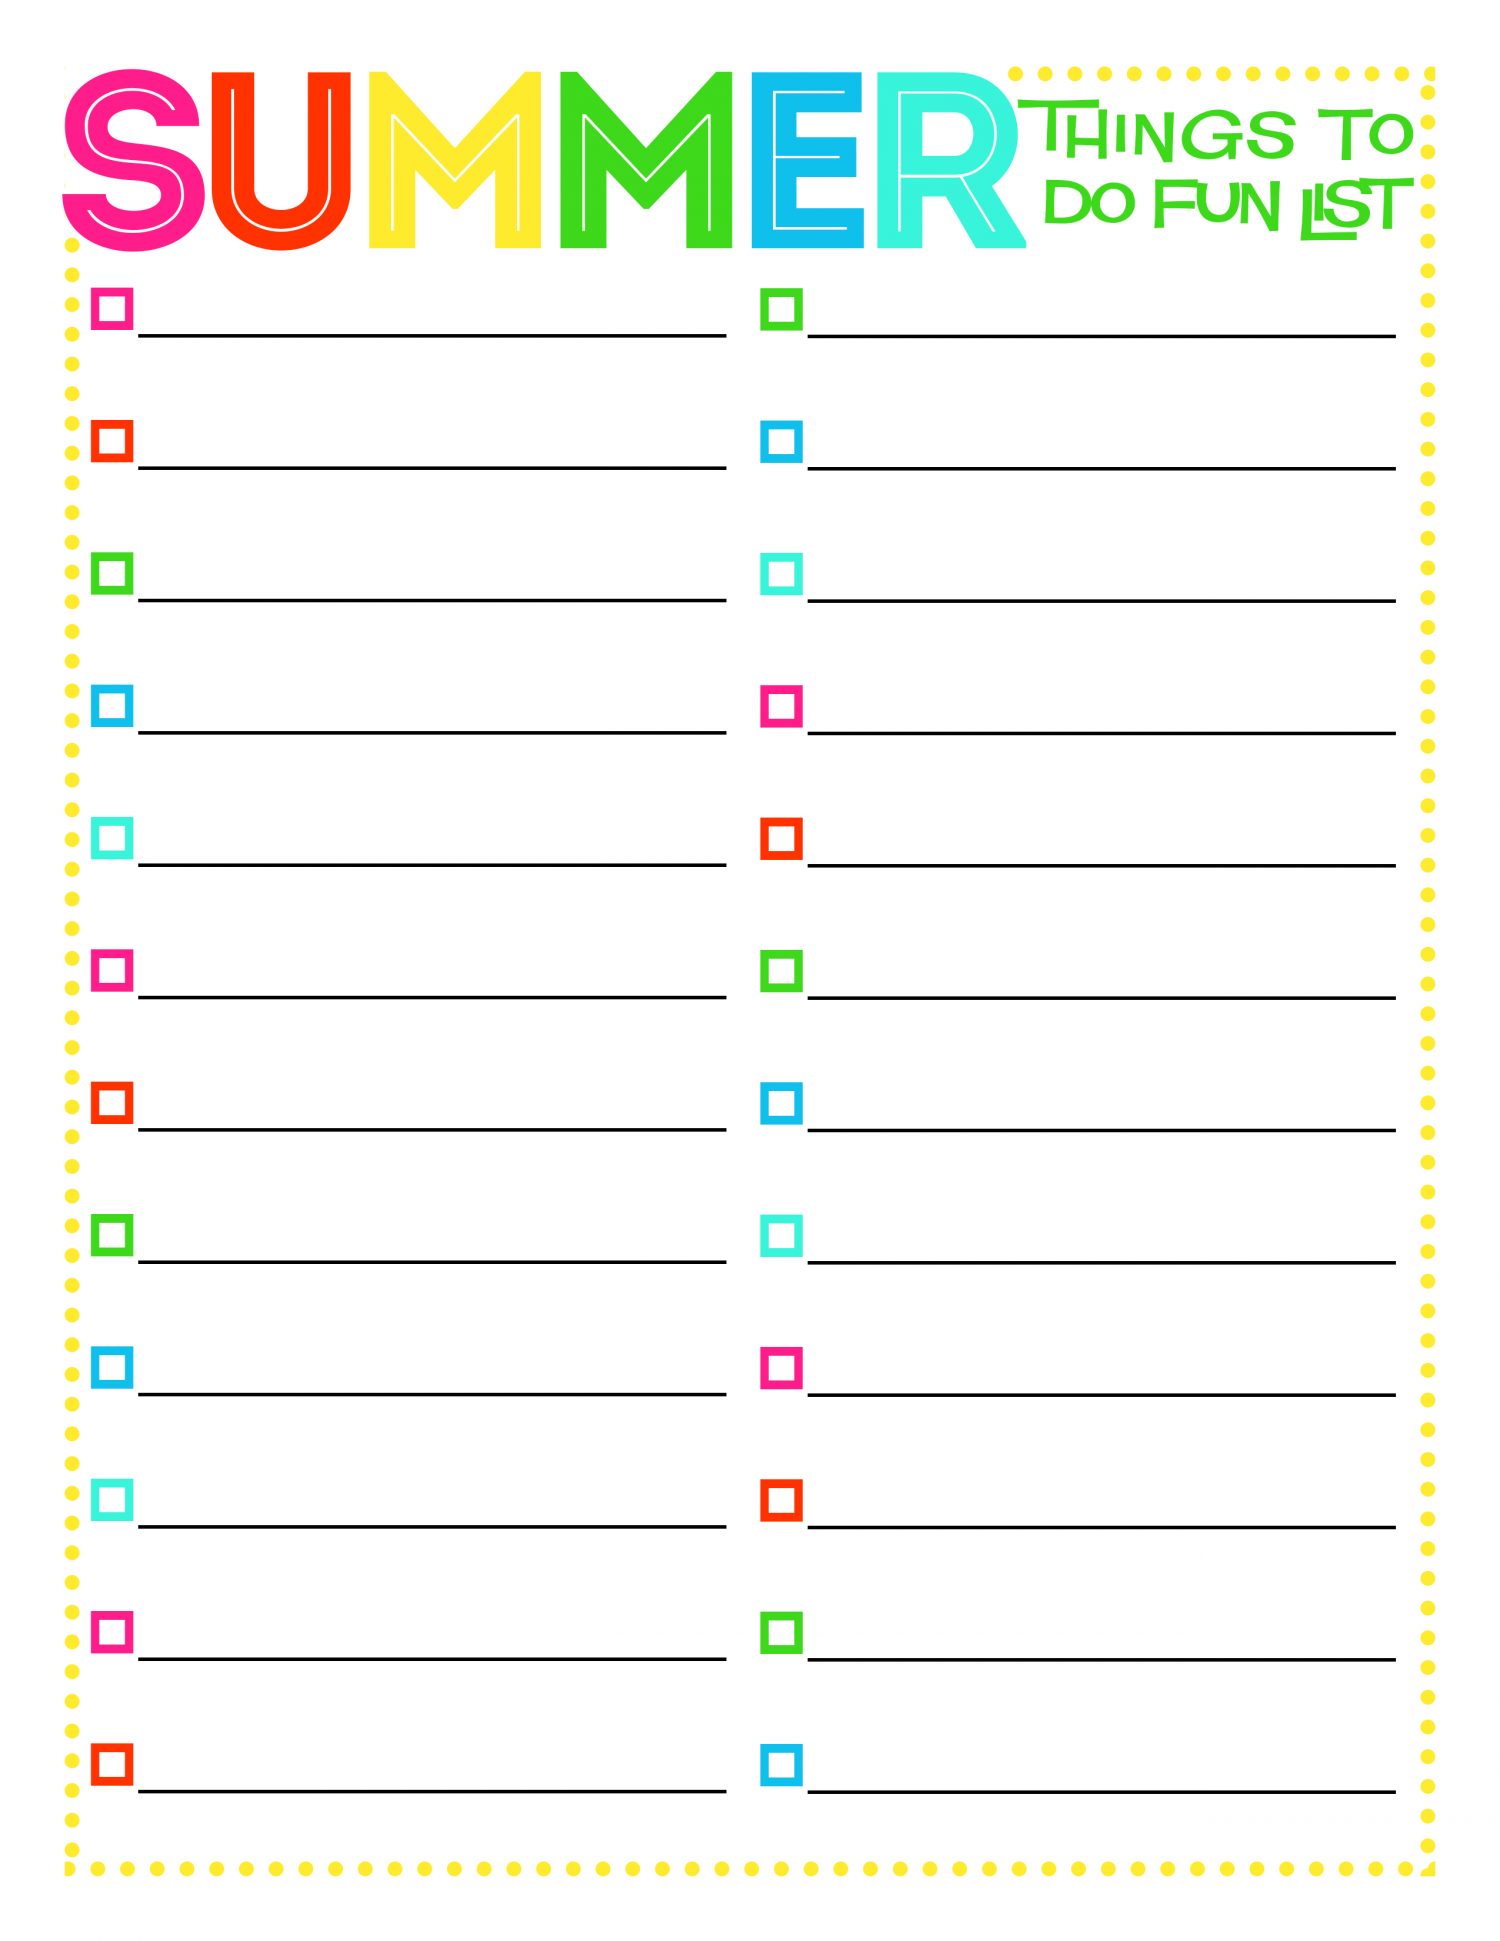 Keep your kids organized and busy this summer with these helpful Best Summer Printables for Kids.